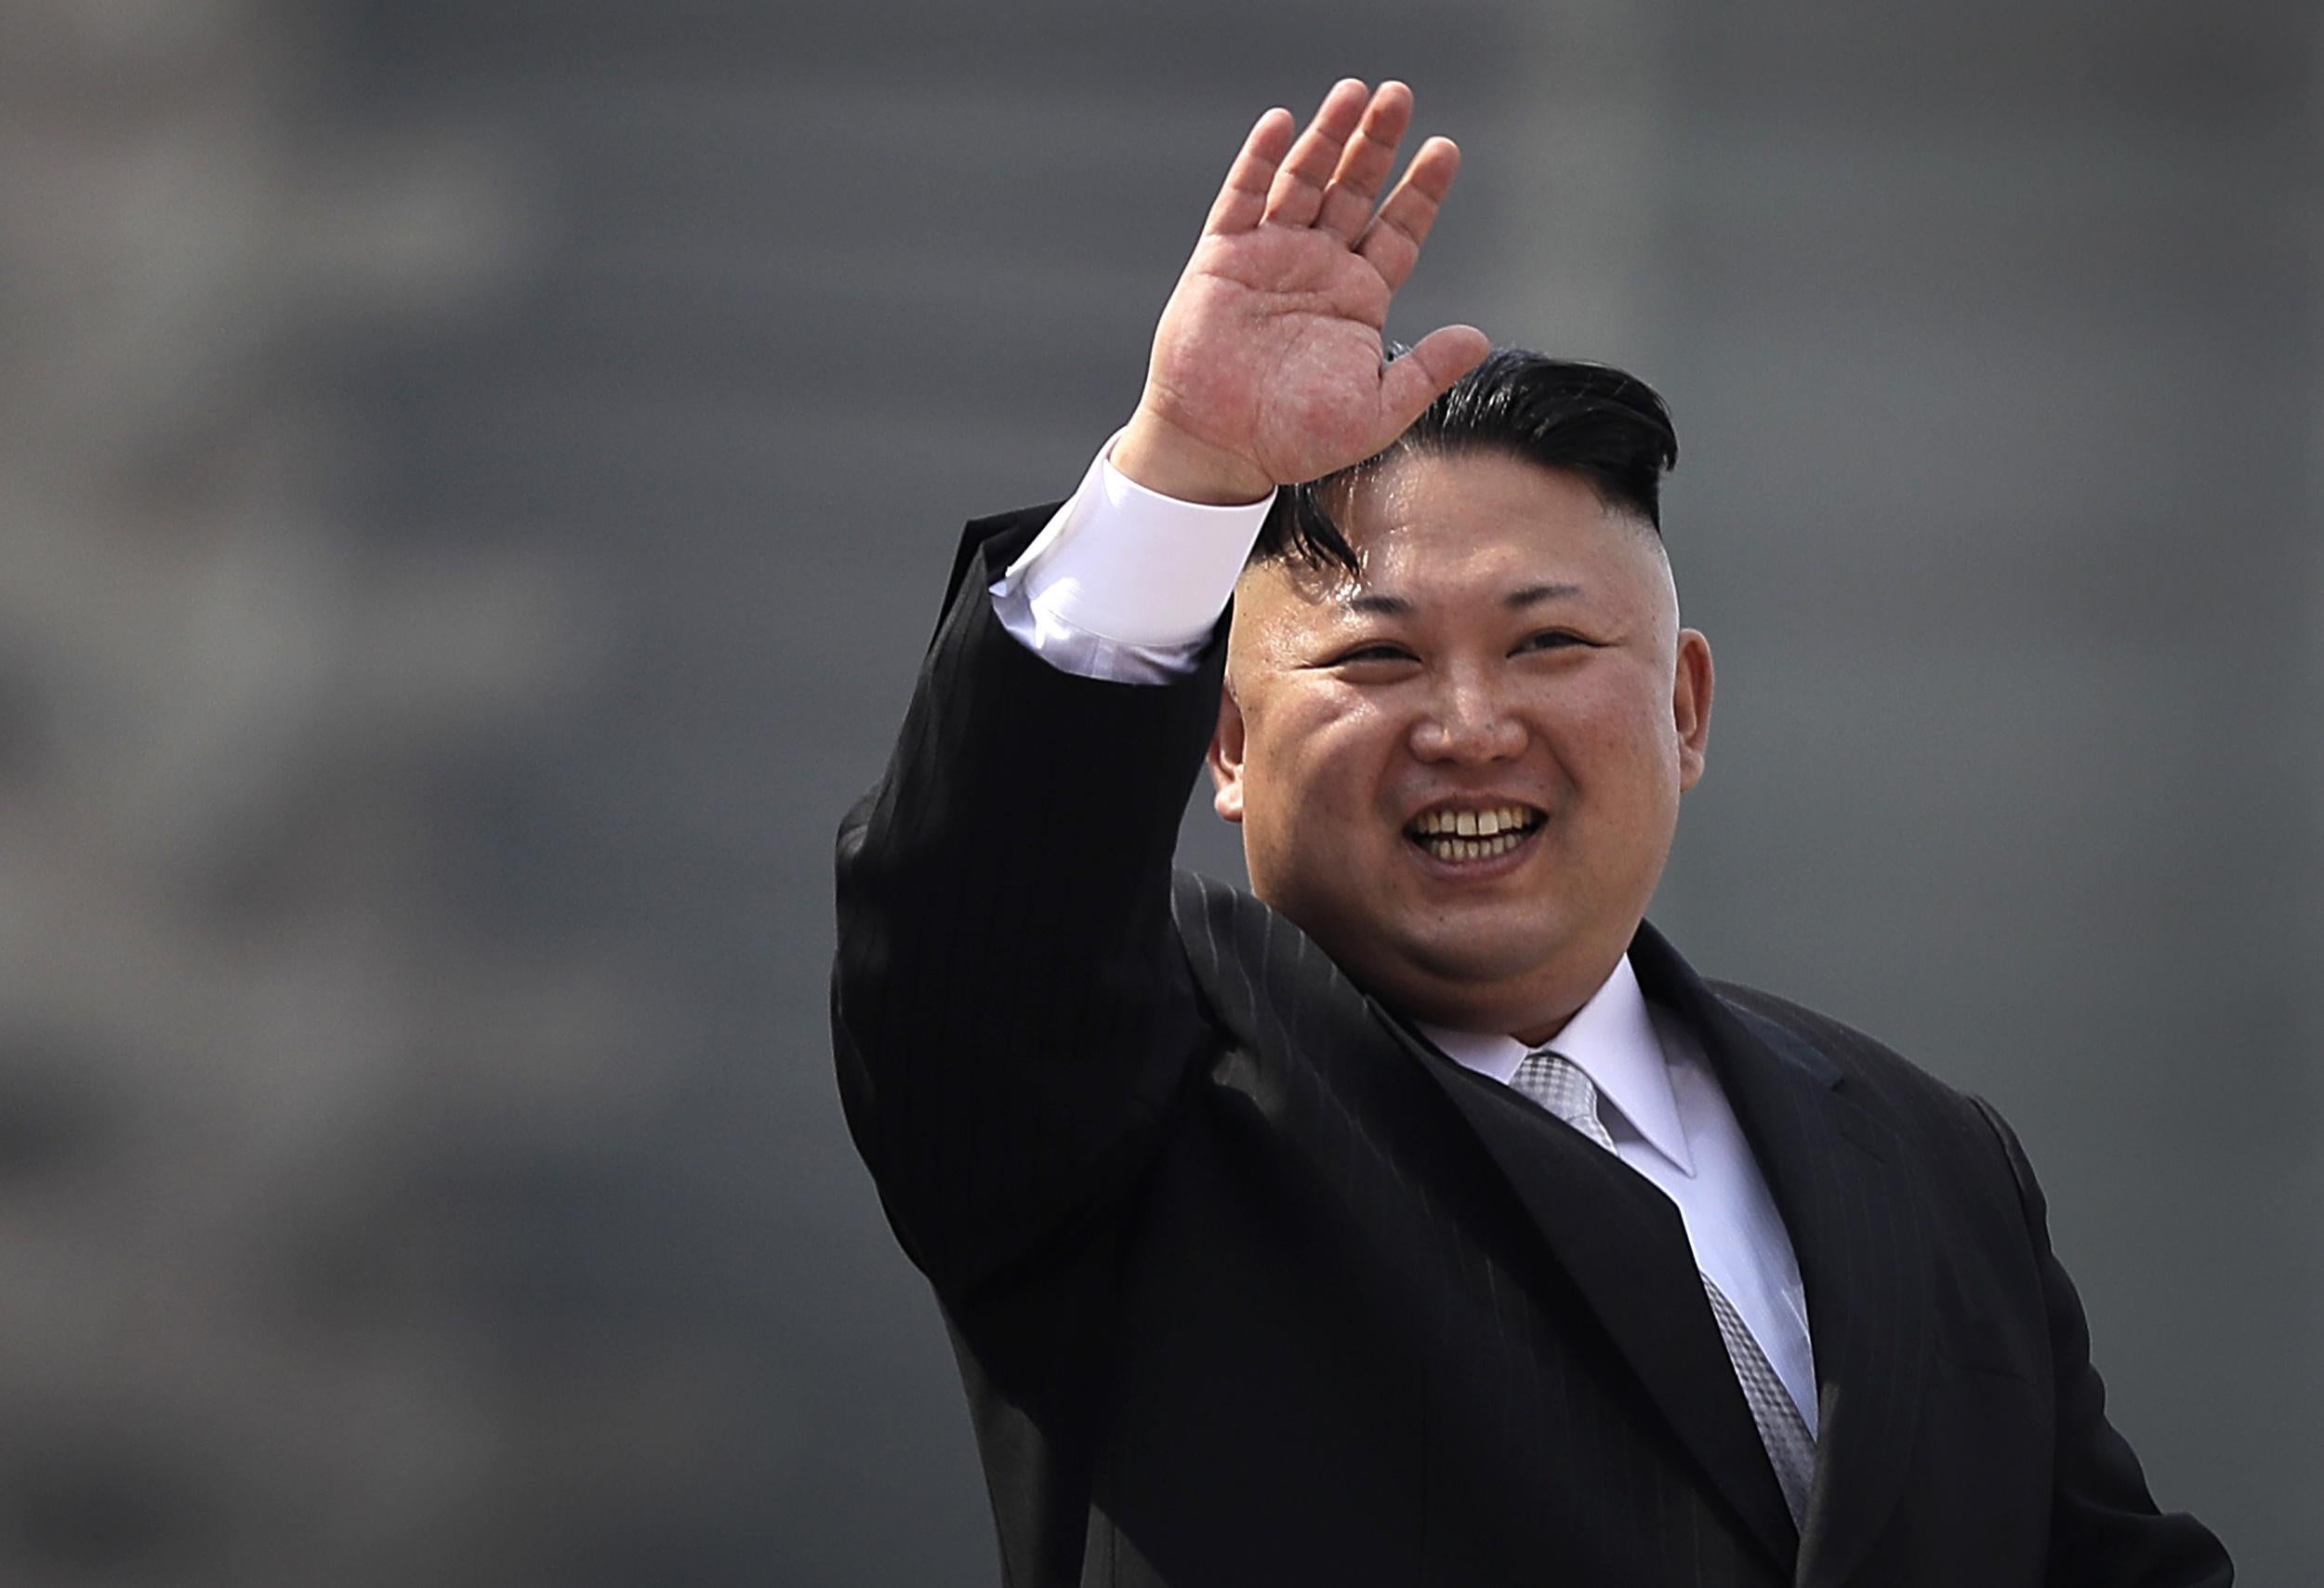 Kim Jong-Un and his family would seek refuge in China, Russia or South America, says professor